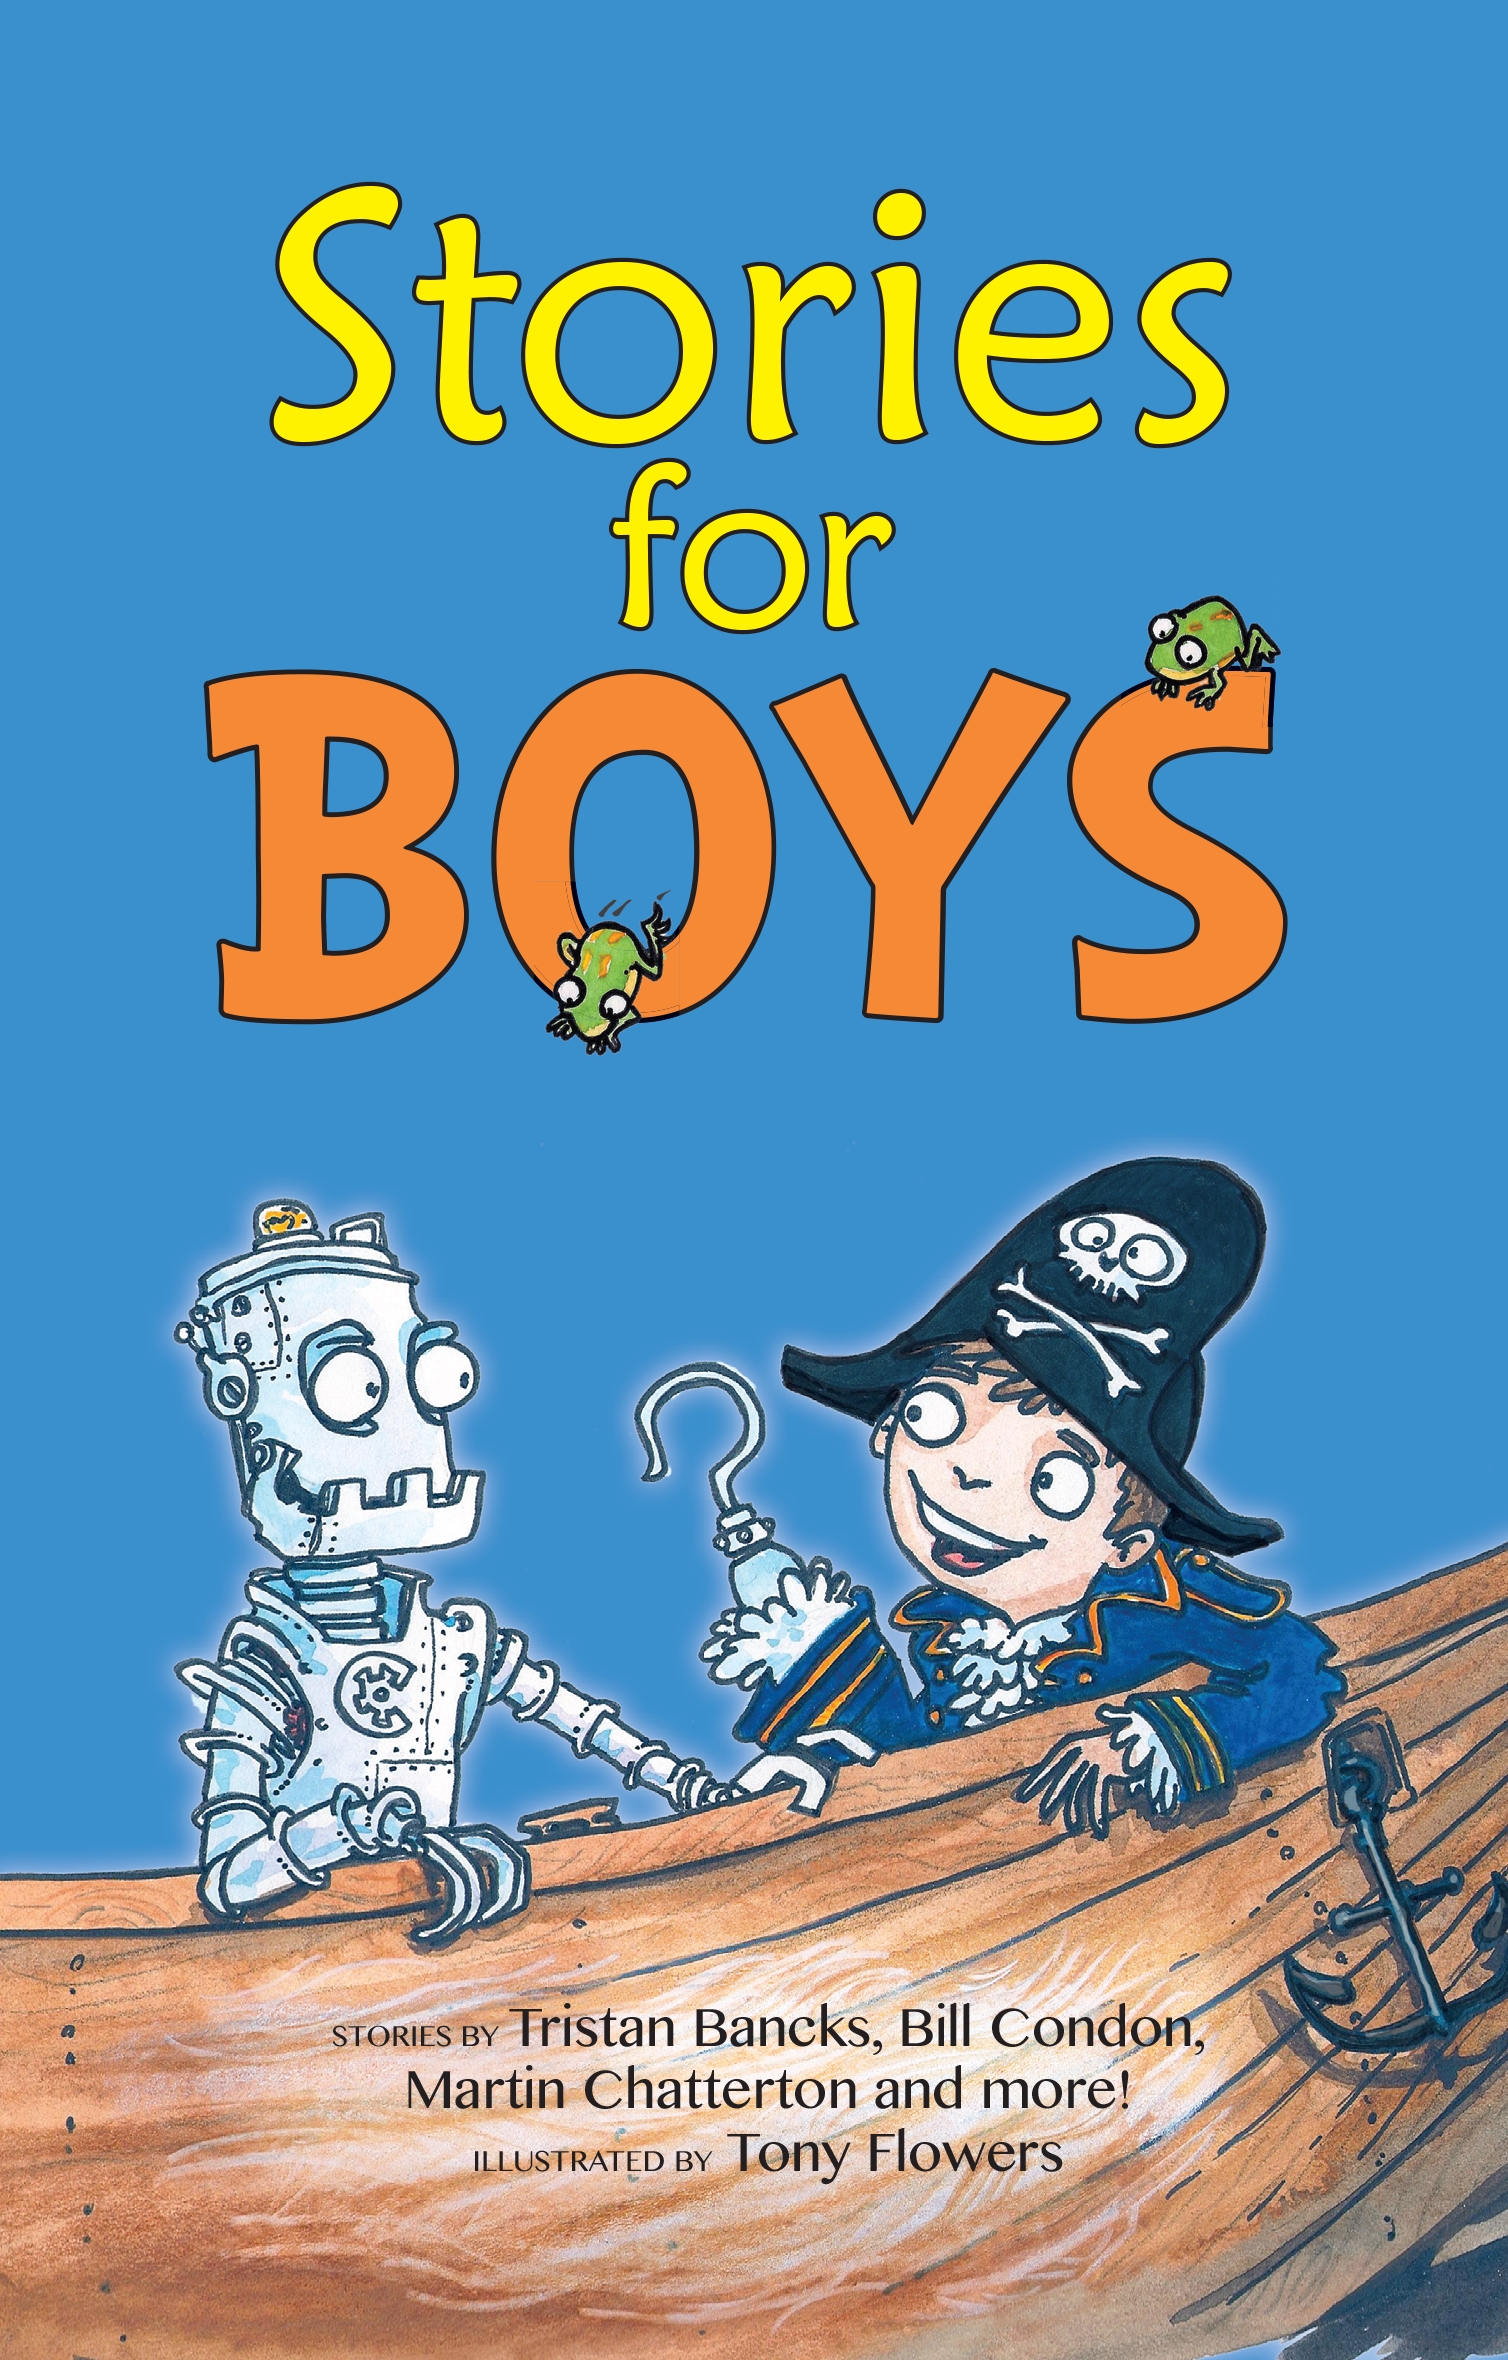 Stories of Adventure book for boys. Boys will be boys книга1993. Boys will be boys книга.